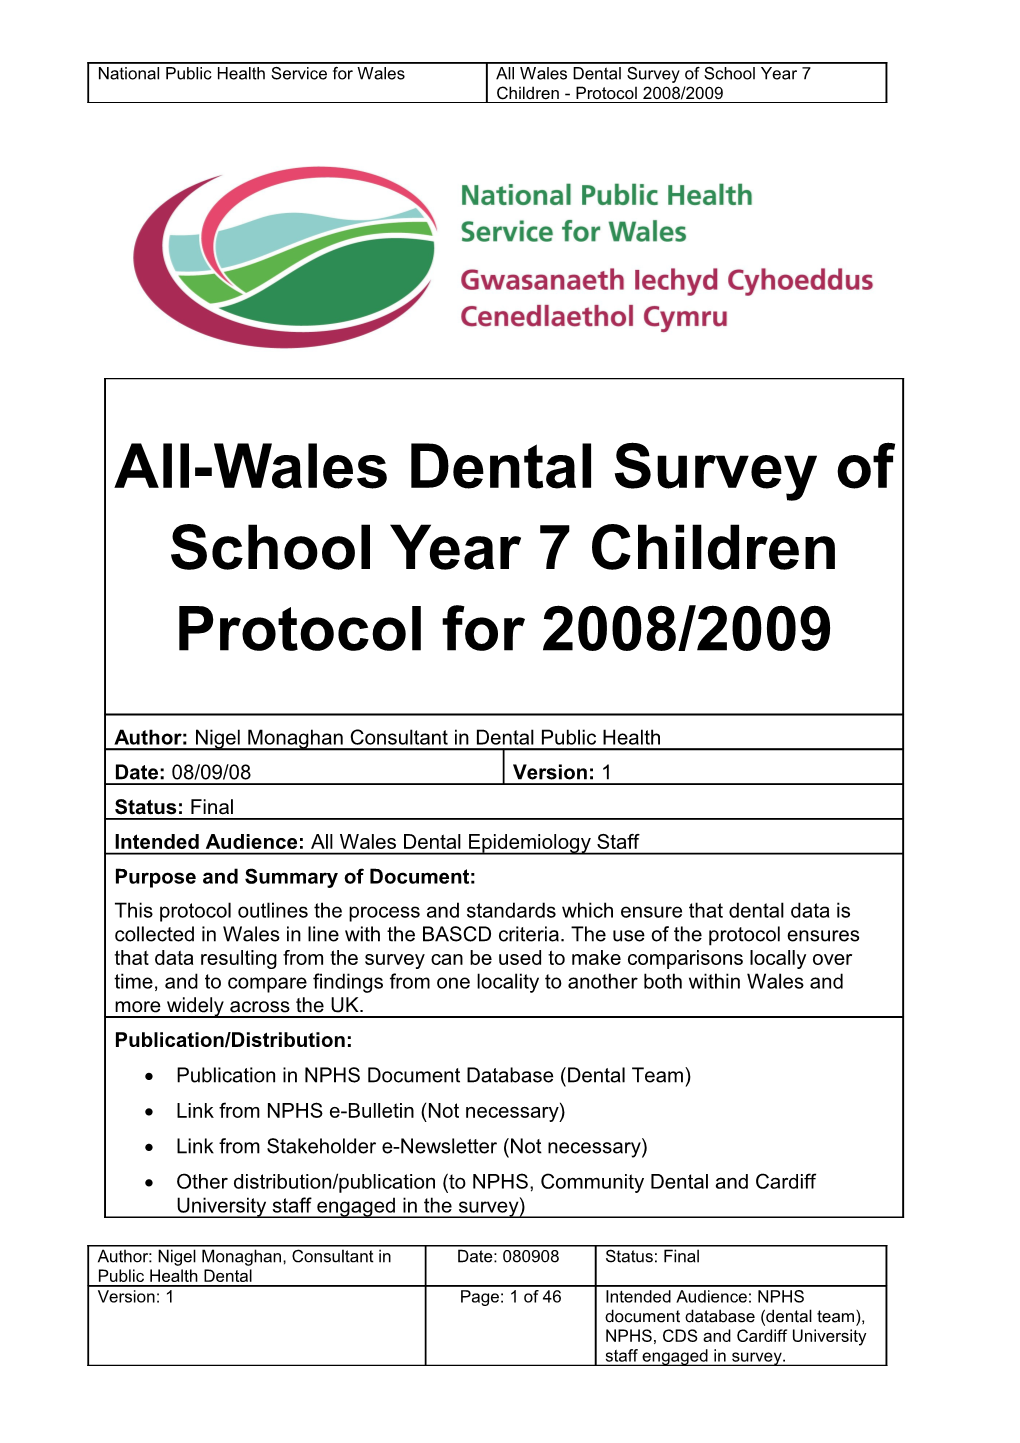 Epidemiological Survey of 12-Year-Old Children Wales 2008/2009